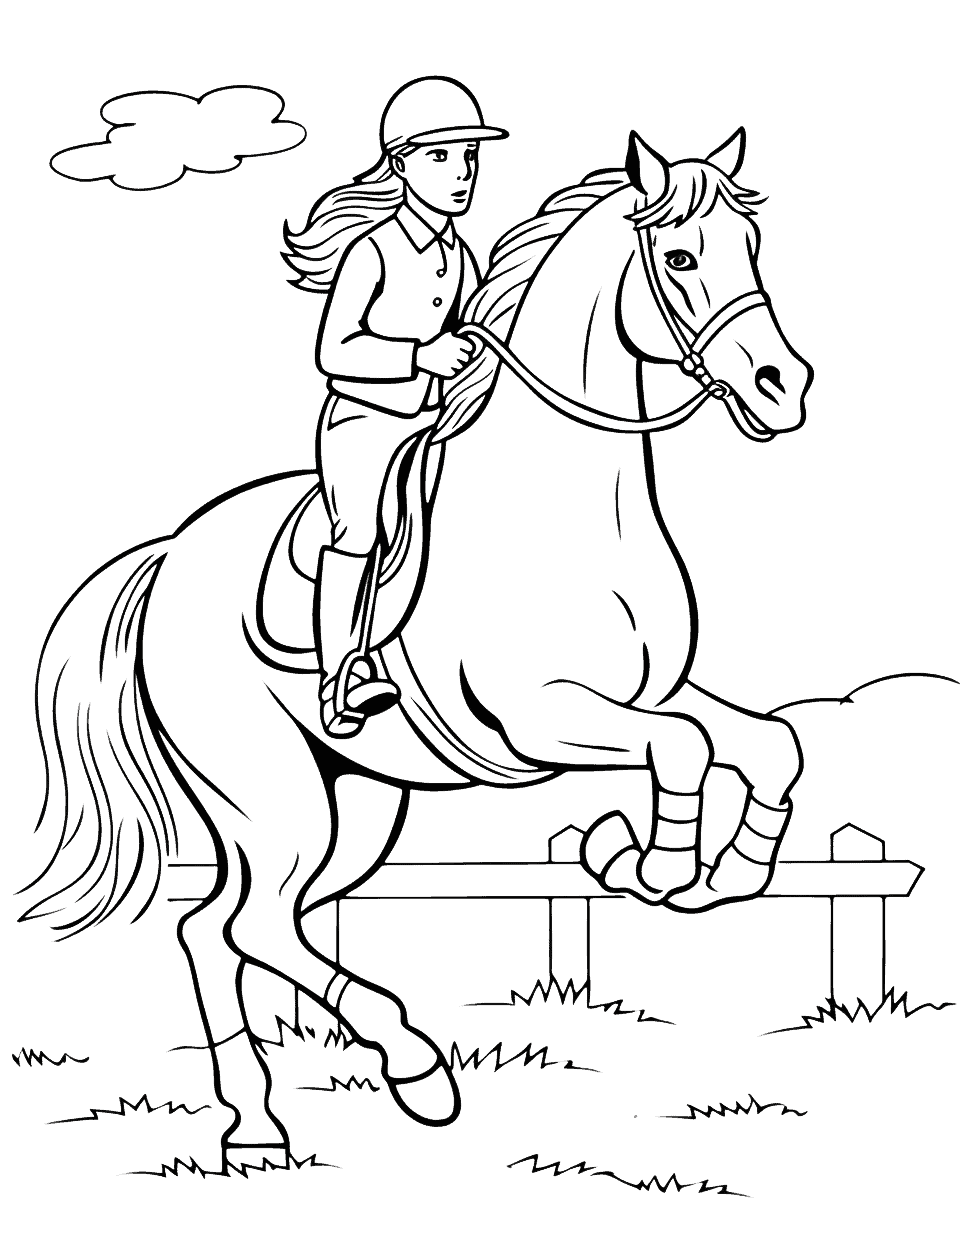 Horse Jumping Show Coloring Page - A horse and rider team in mid-jump at a show jumping event.